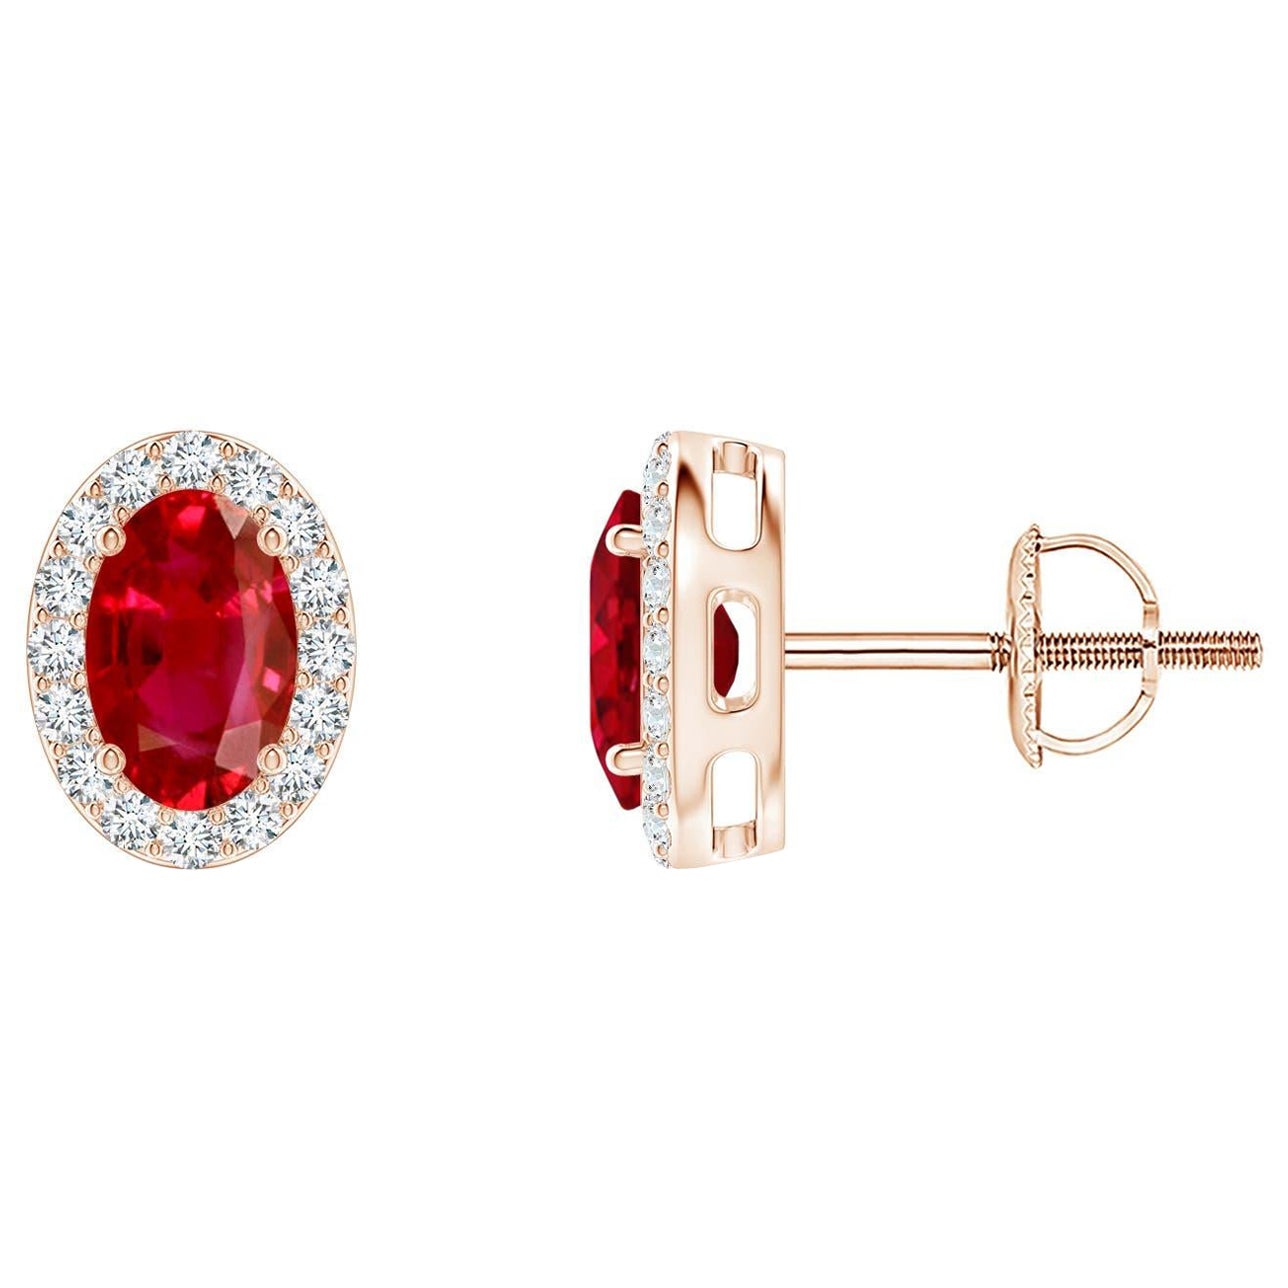 ANGARA Natural Oval 1.20ct Ruby Studs with Diamond Halo in 14K Rose Gold